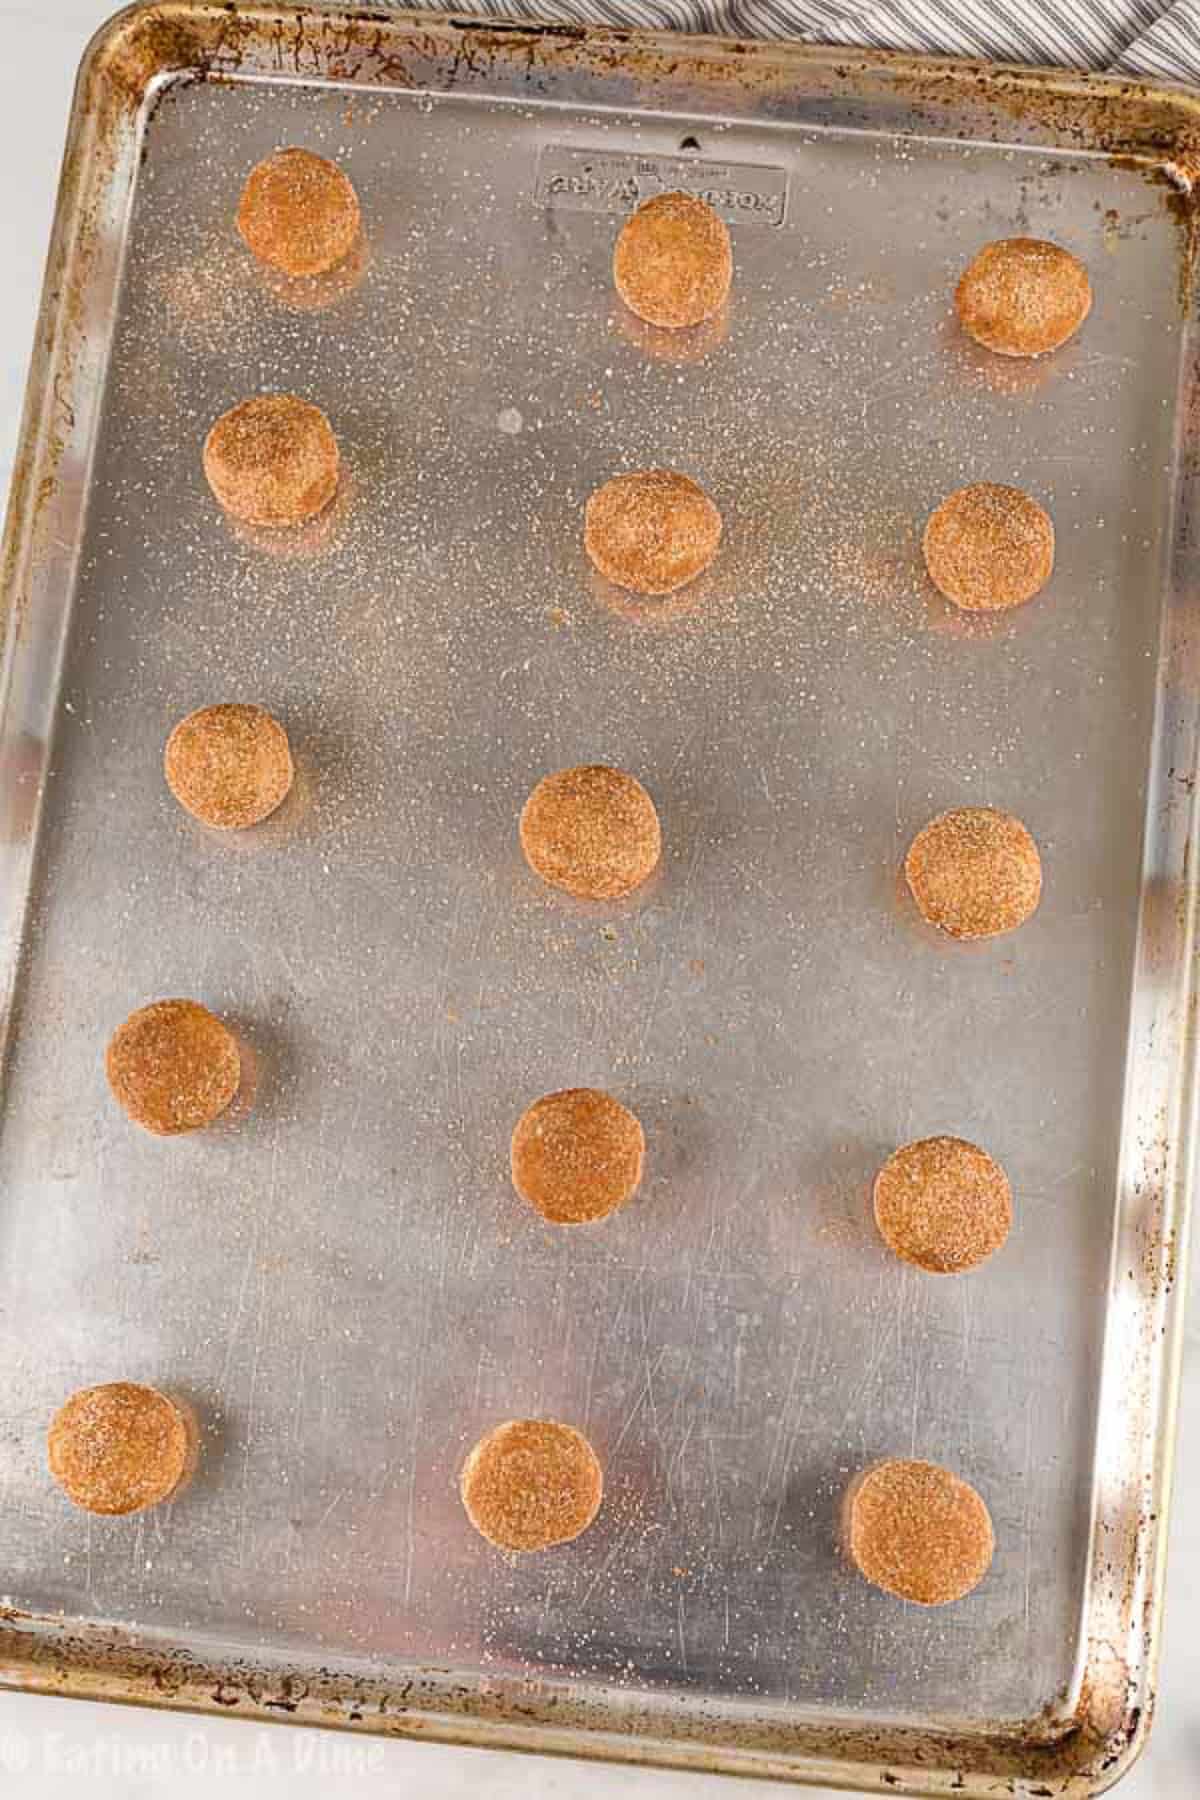 The cookie dough balls place on a baking sheet ready to be baked.  